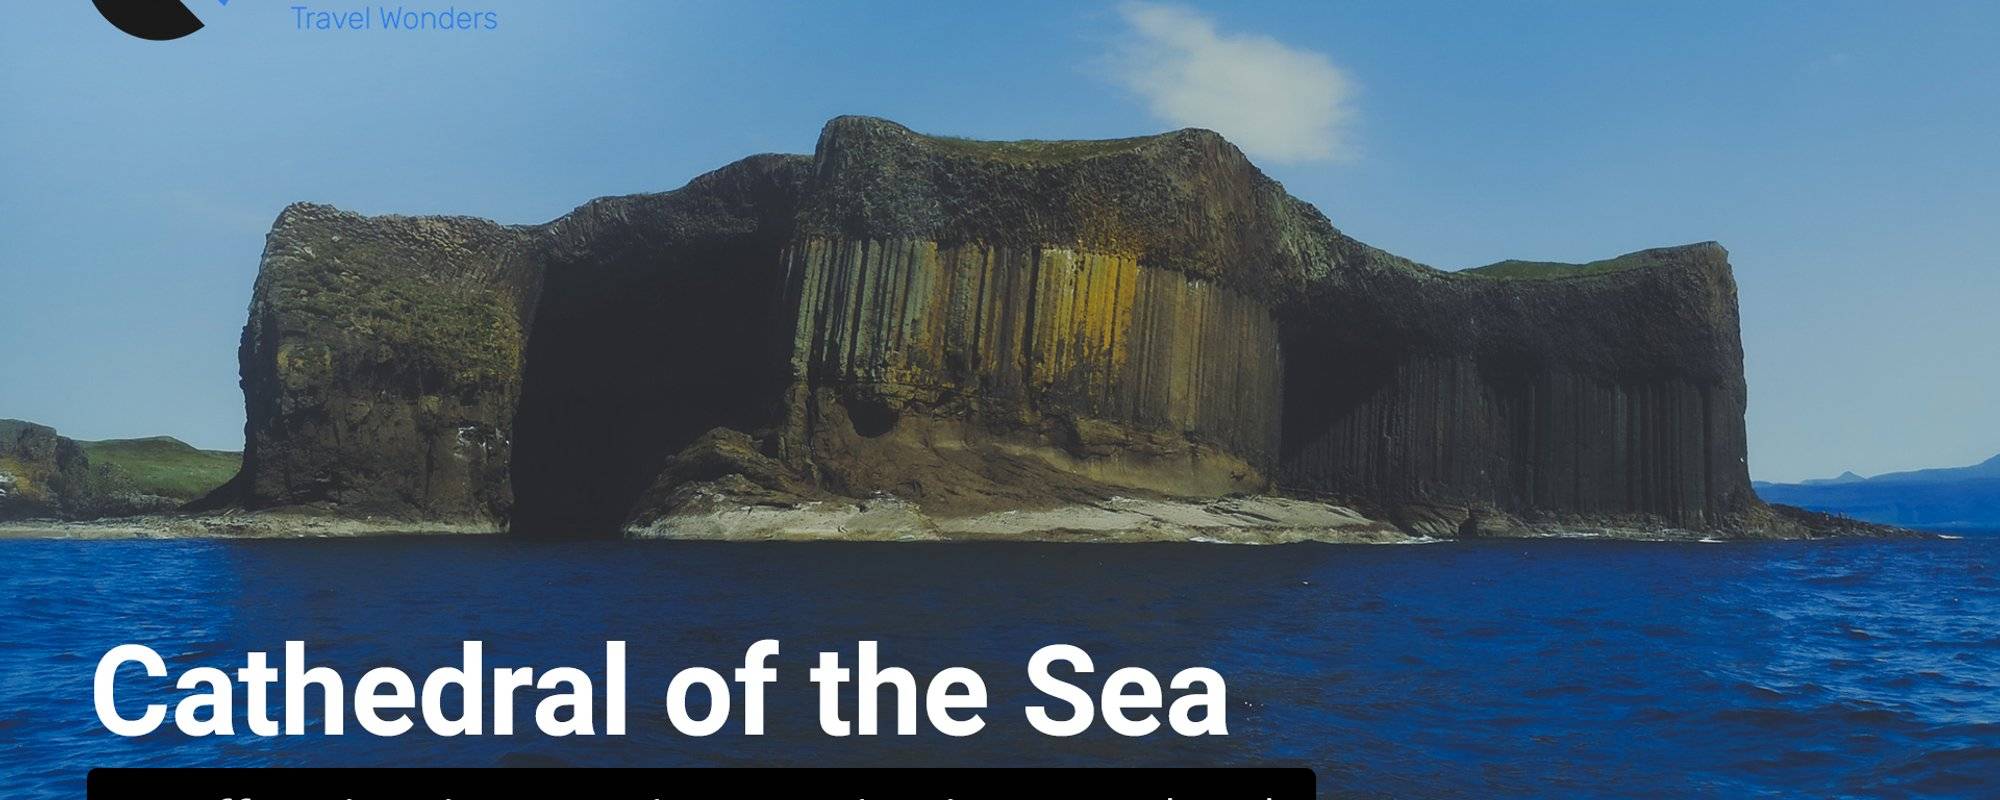 Visiting Staffa Island - Cathedral of the Sea